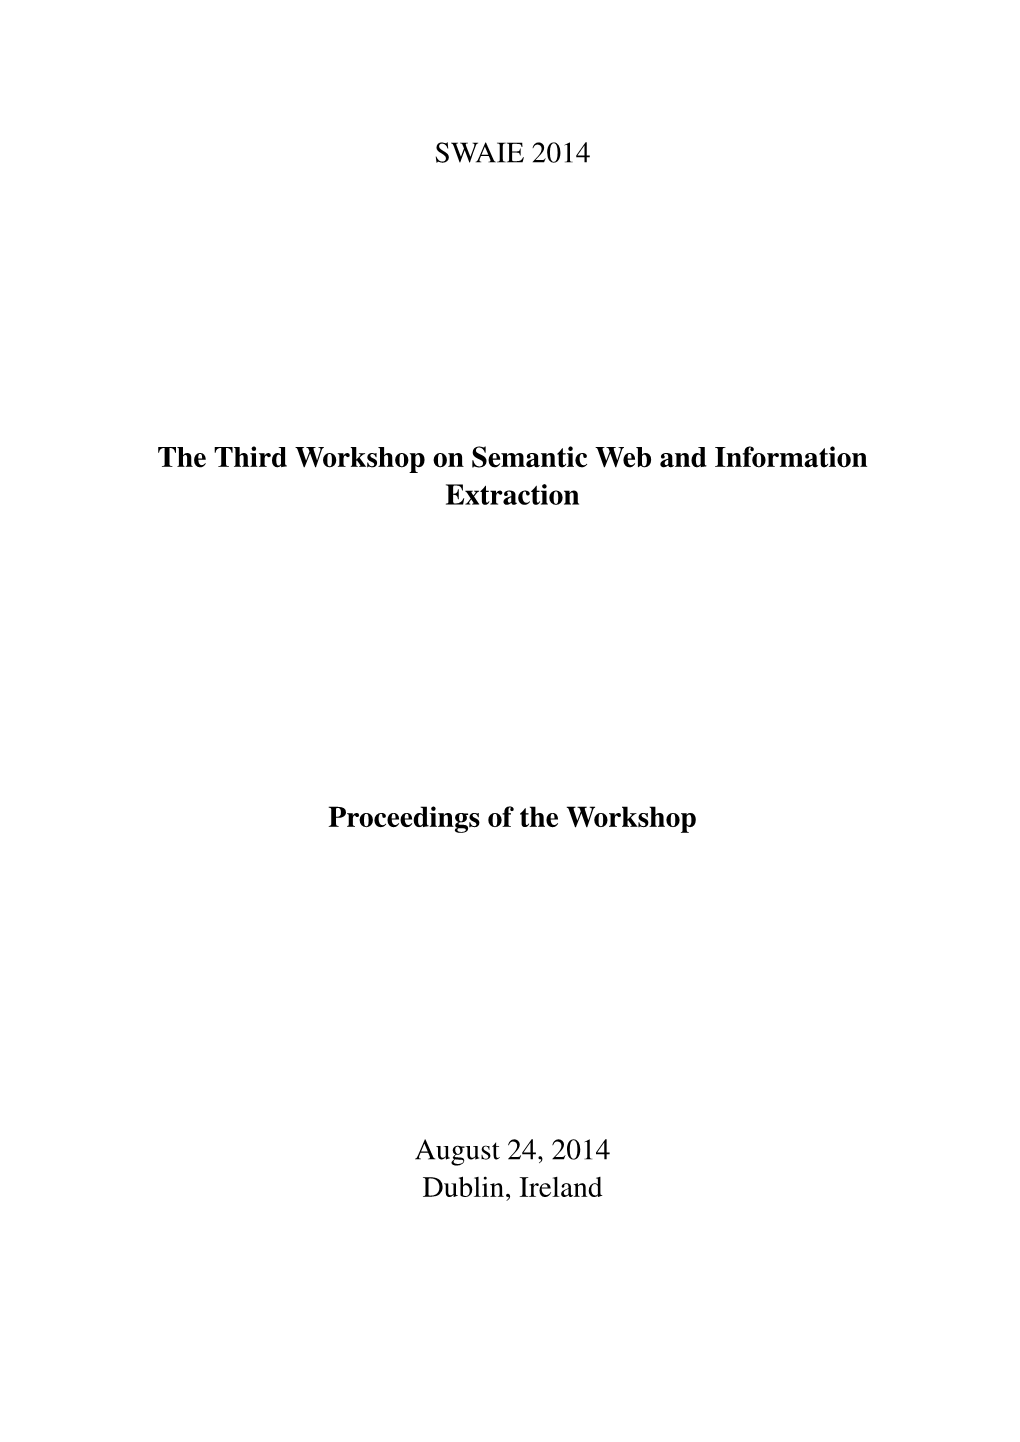 SWAIE 2014 the Third Workshop on Semantic Web and Information